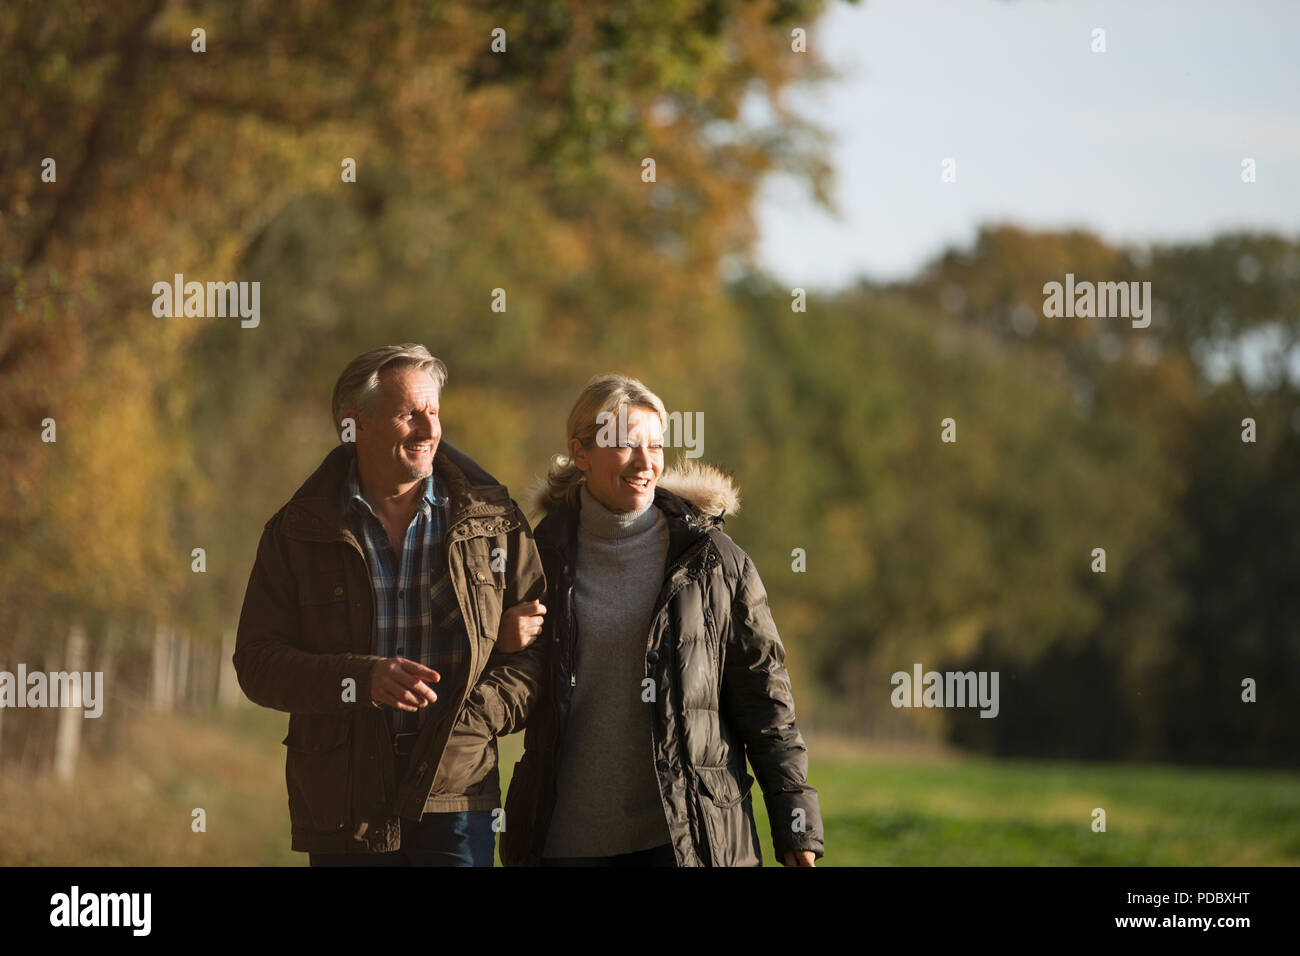 Mature couple walking arm in arm in sunny autumn park Stock Photo